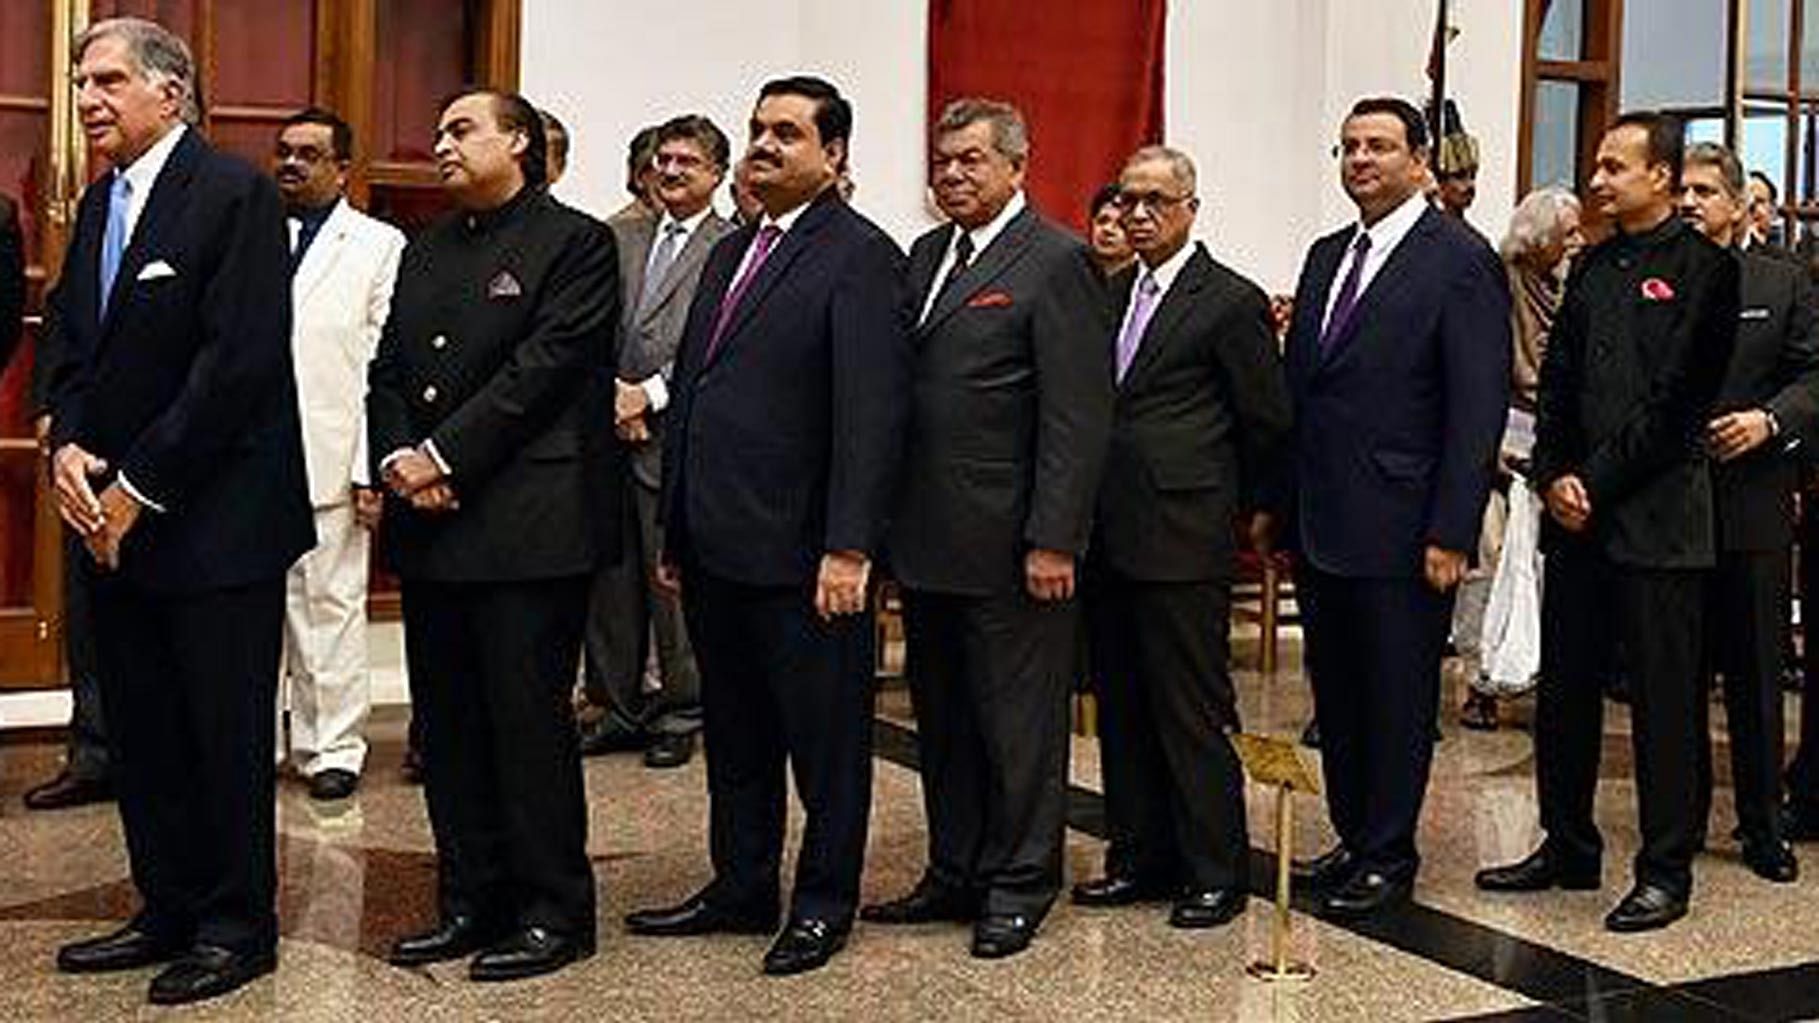 File photo Industrialists at a banquet hosted in honour of US President Obama at the Rashtrapati Bhavan in New Delhi. (Photo: PTI)